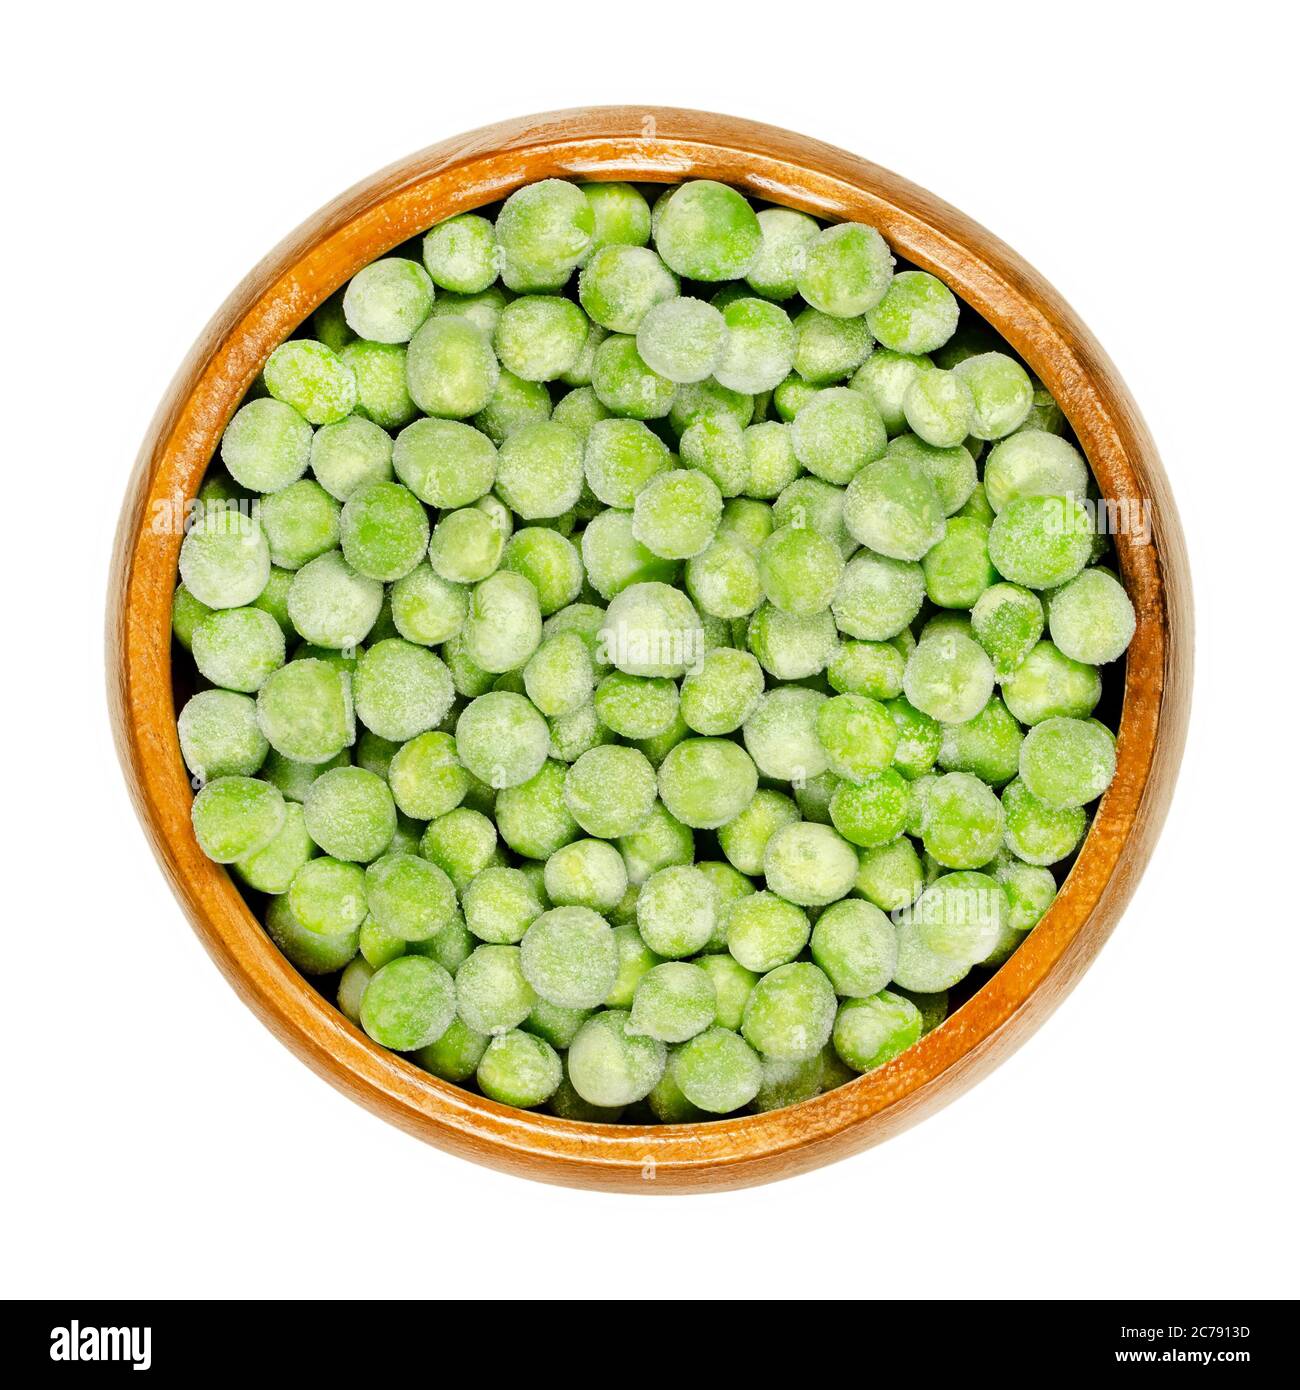 Frozen green peas in wooden bowl. Small spherical seeds of the pod fruit Pisum sativum, frozen to keep the legumes fresh. Closeup, from above. Stock Photo